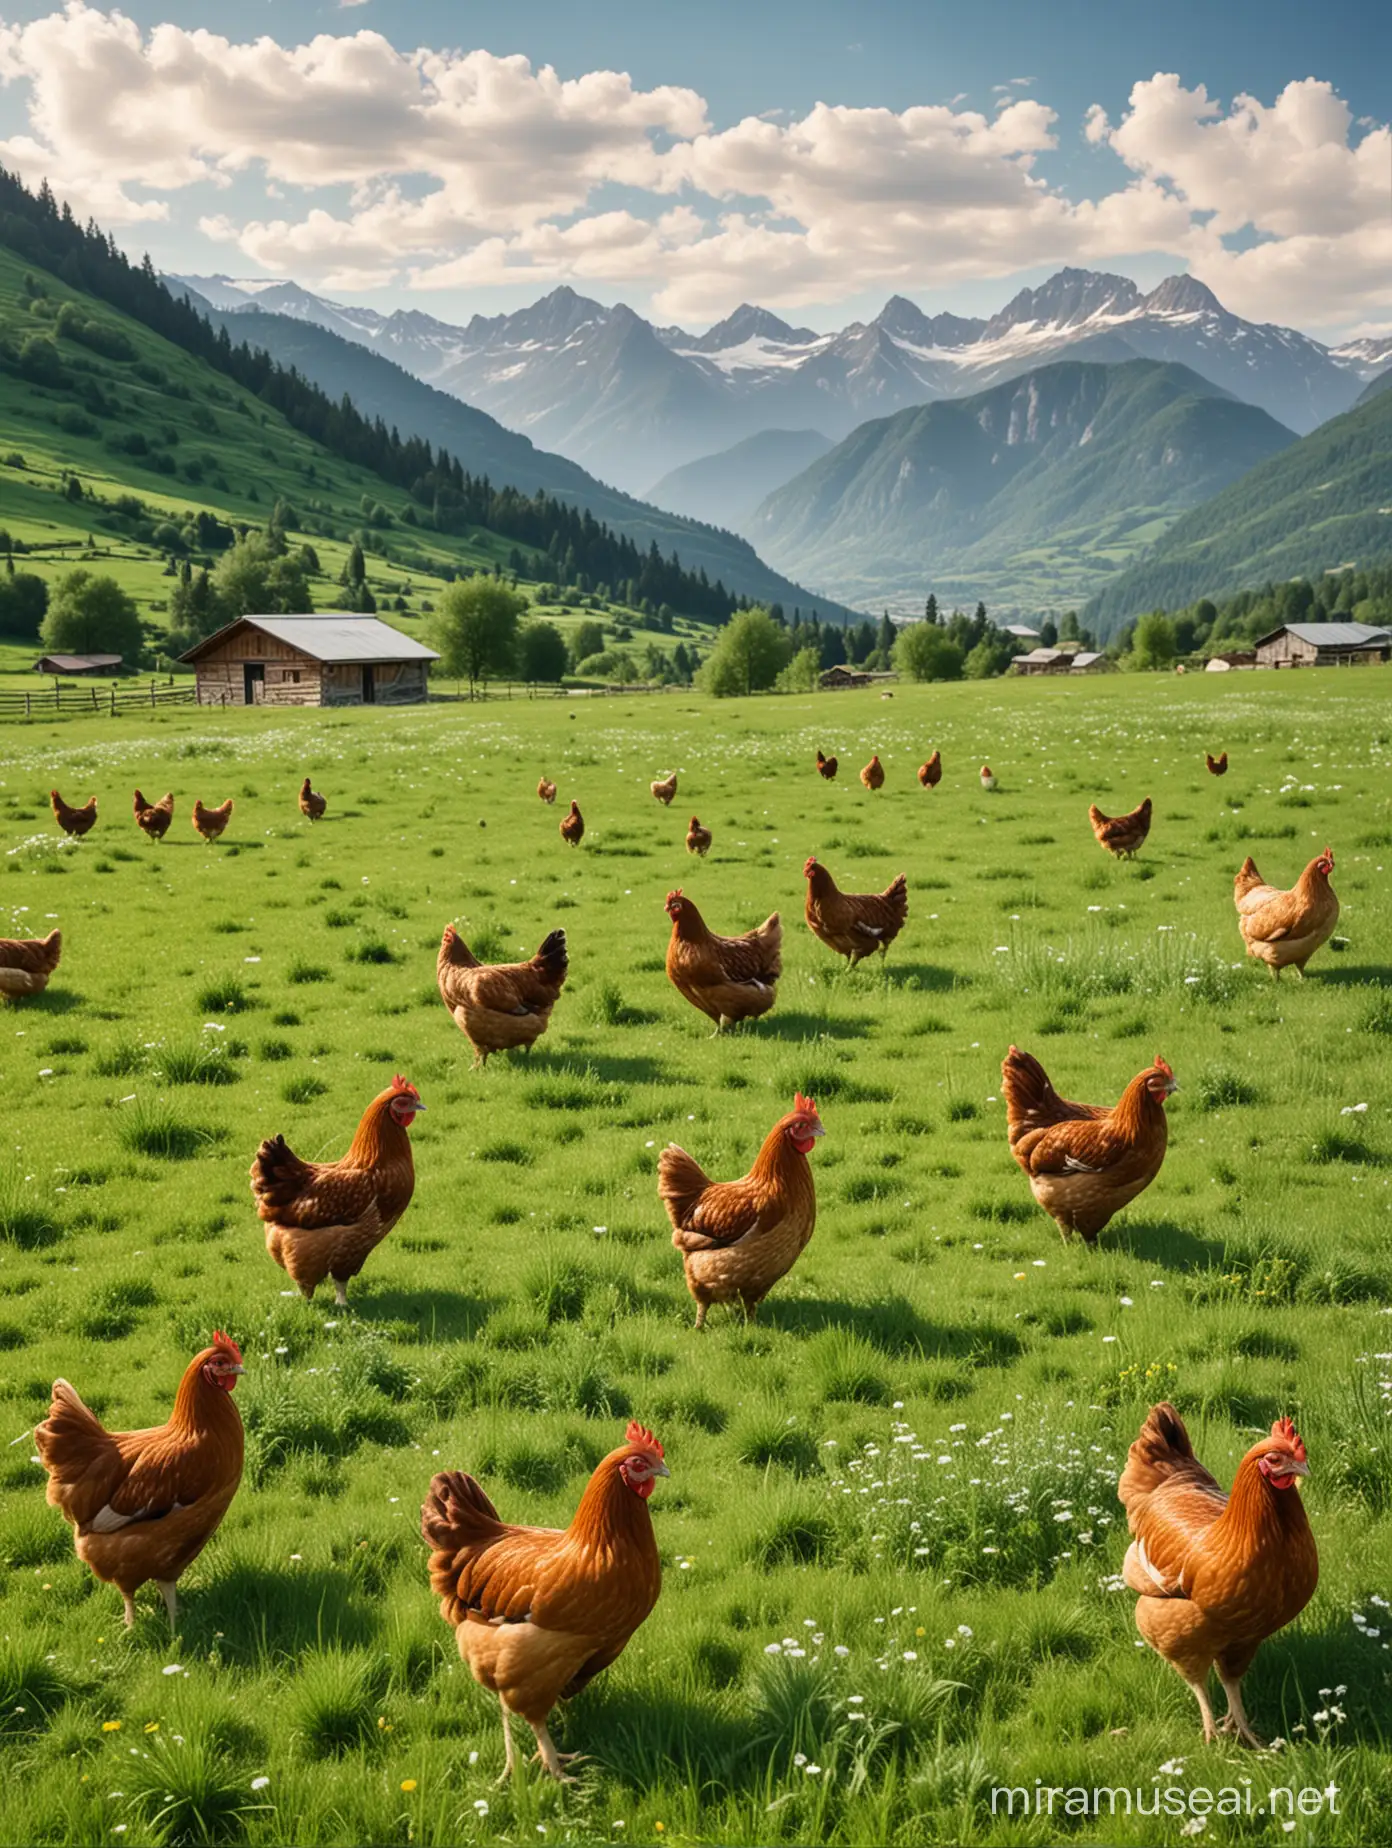 Scenic Mountain View with Grazing Hens in Lush Green Field